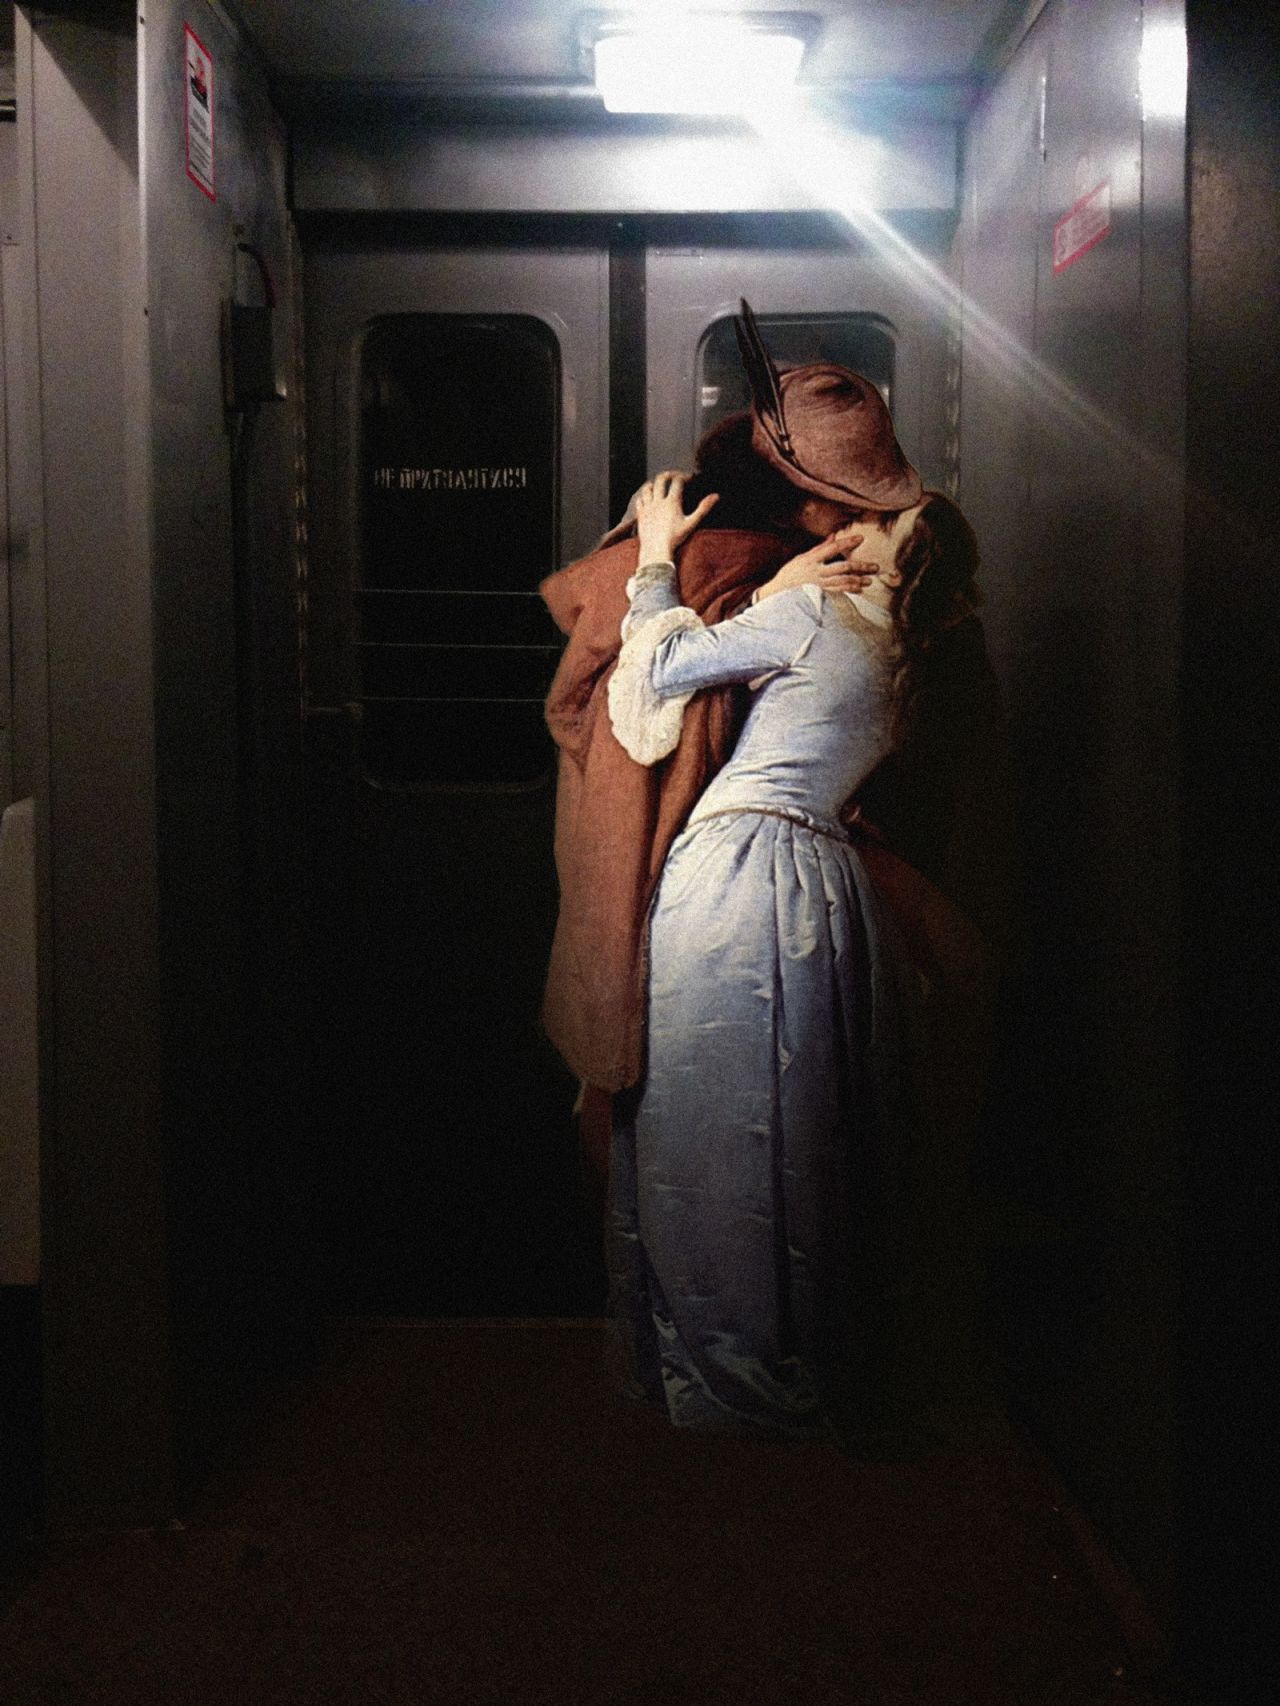 Italian Romantic Francesco Hayez portrays a couple from the Middle Ages in "The Kiss" (1859), the intense moment catapulted from courtly surrounds into a midnight train carriage by Kondakov. 